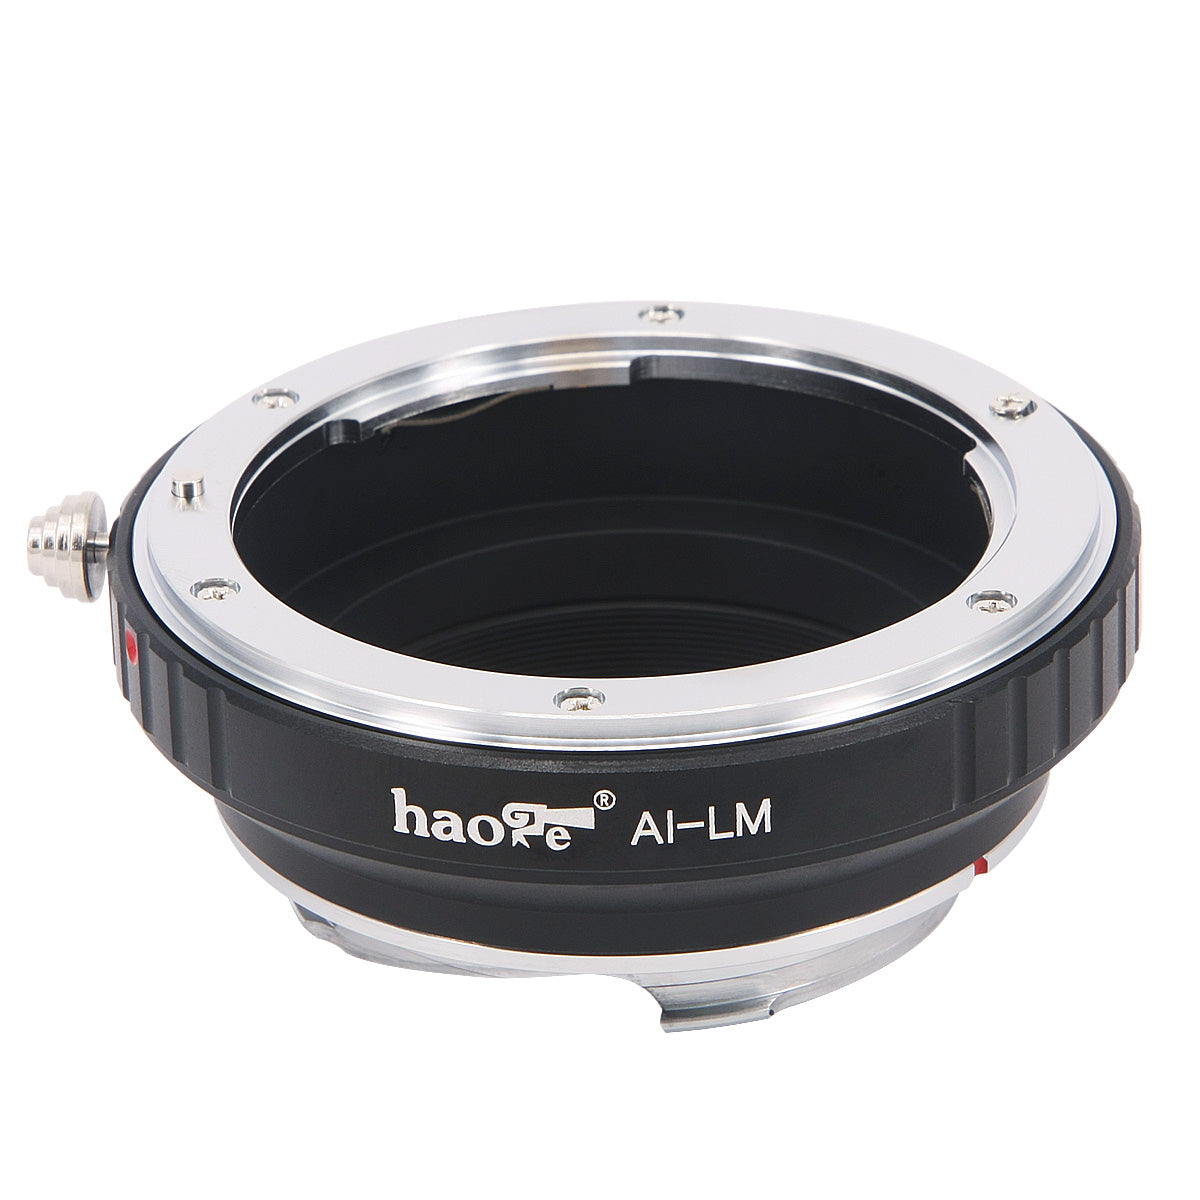 Haoge Lens Mount Adapter for Nikon Nikkor AI / AIS / D Lens to Leica M-mount Camera such as M240, M240P, M262, M3, M2, M1, M4, M5, CL, M6, MP, M7, M8, M9, M9-P, M Monochrom, M-E, M, M-P, M10, M-A